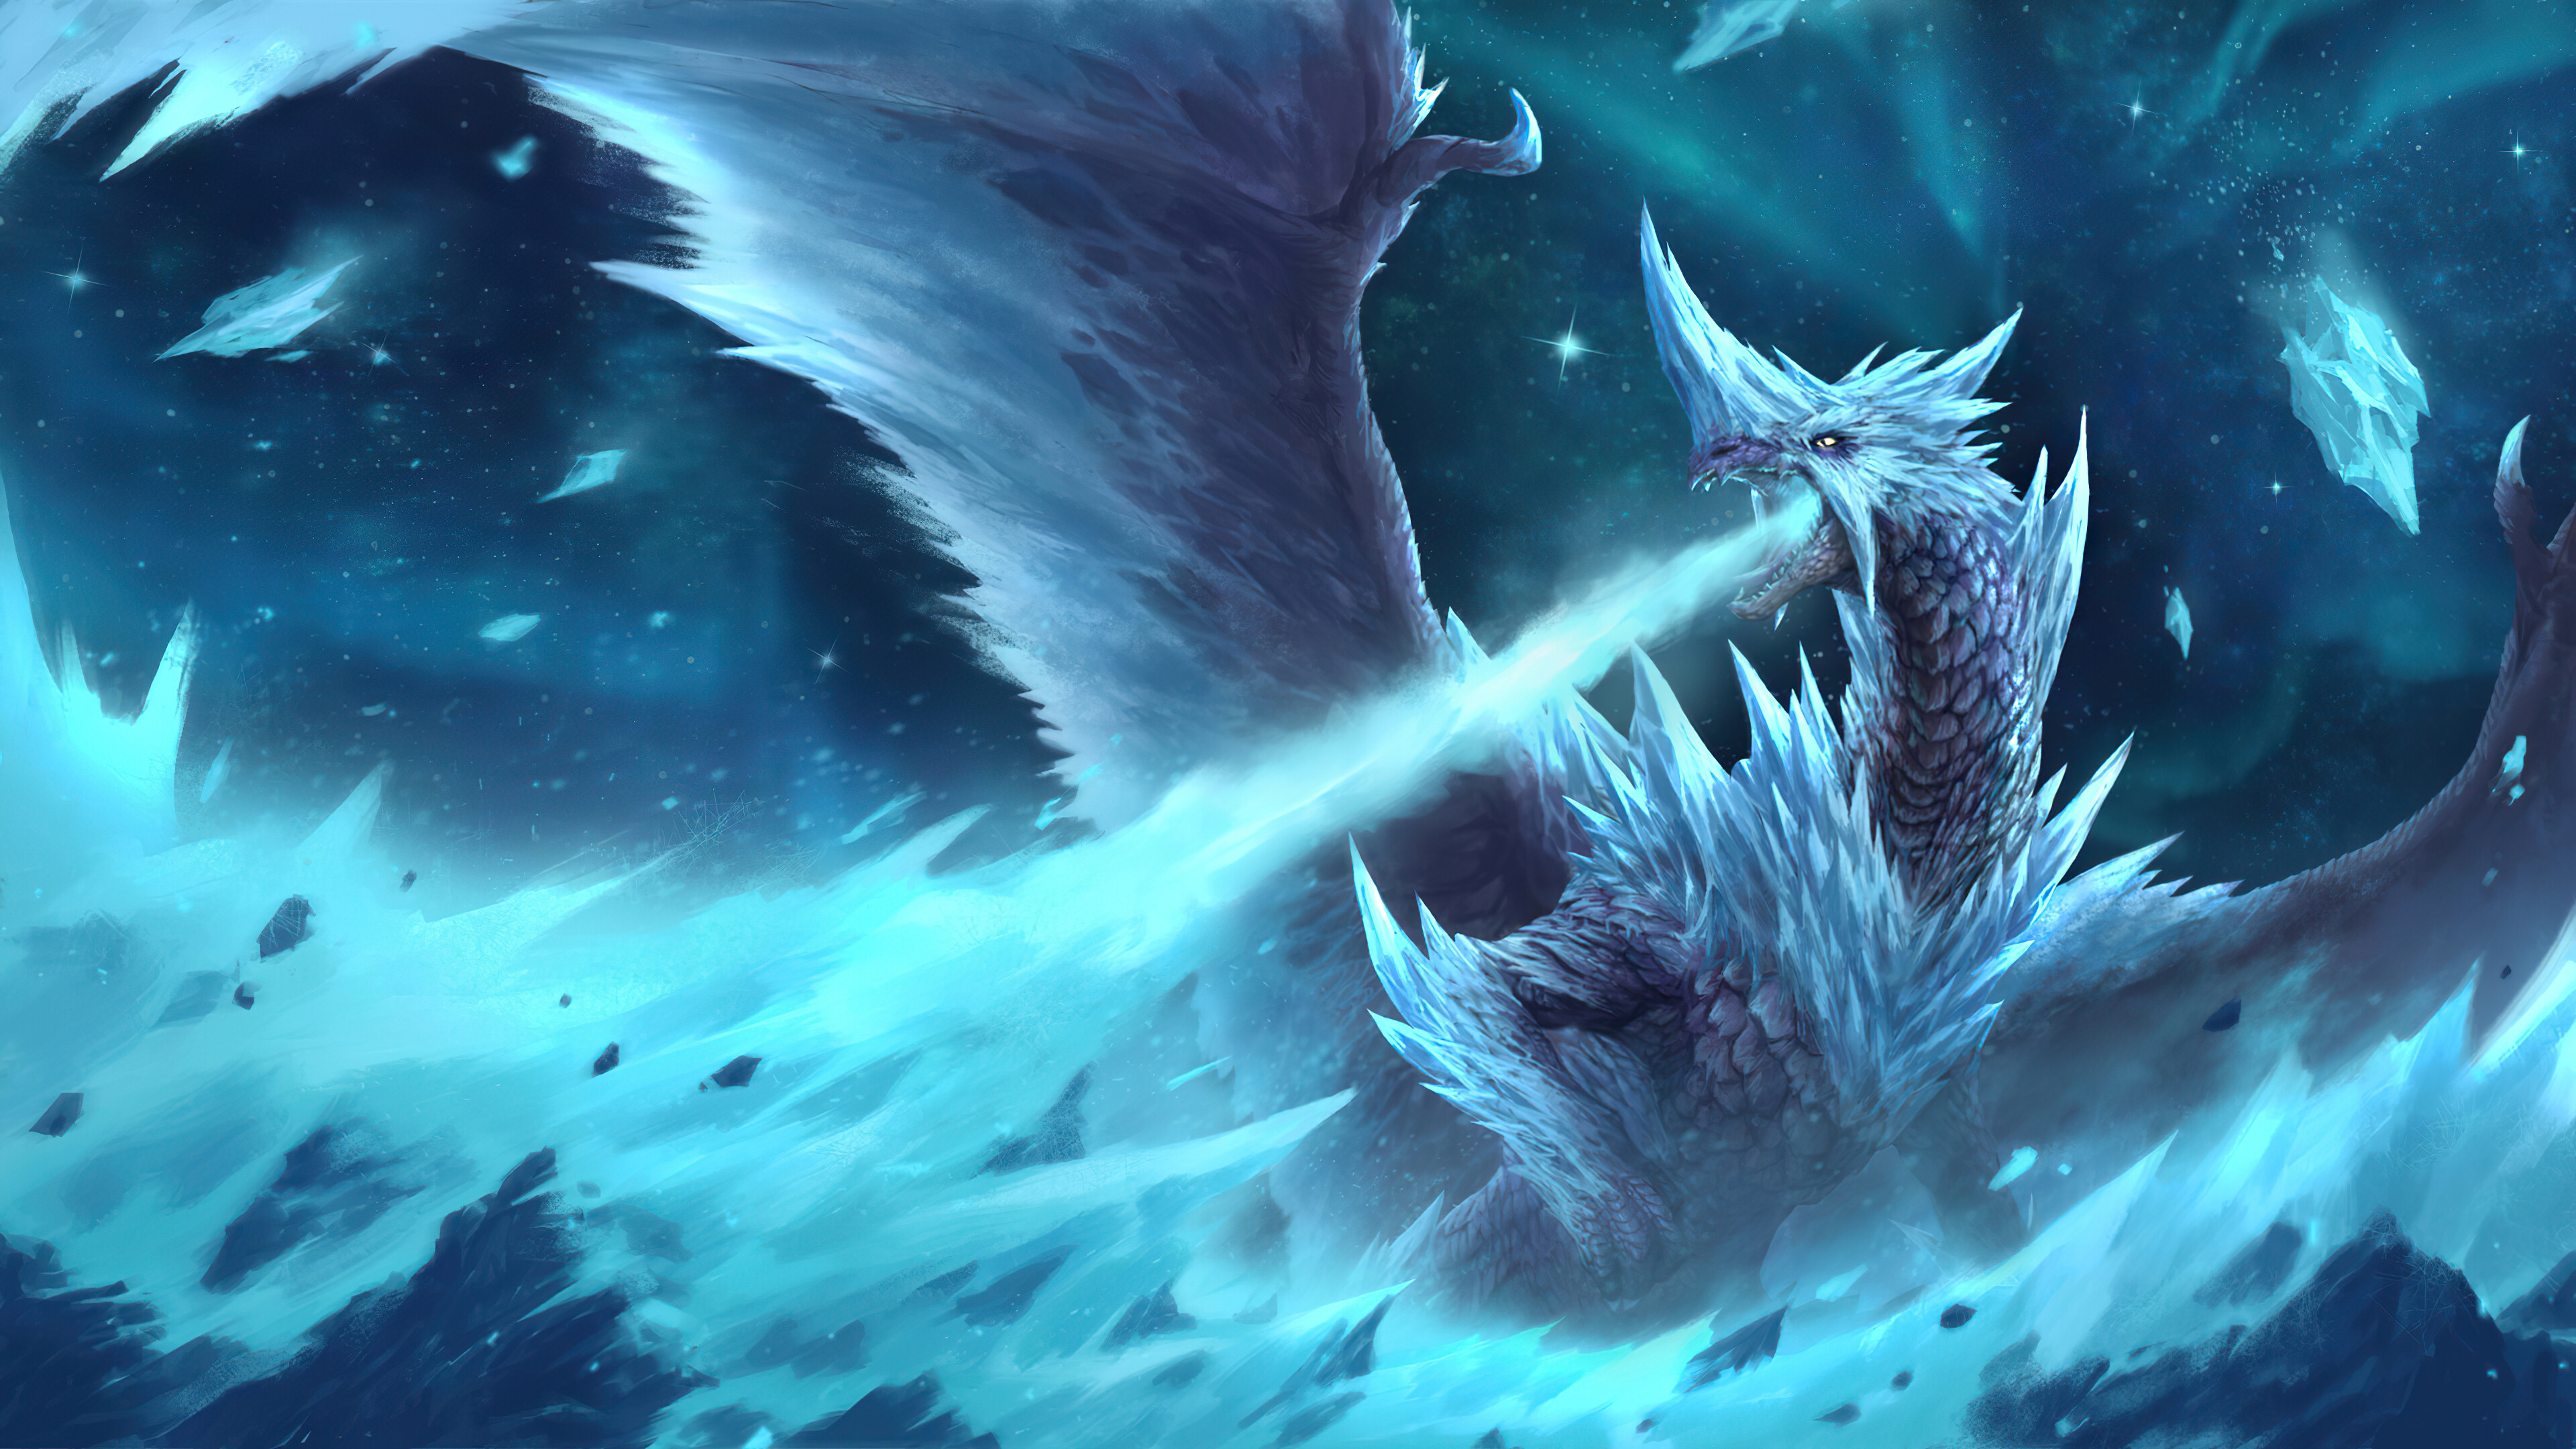 Dragon: Velkhana, Iceborne Wyvern, Can control the cold, and use its freezing breath. 3840x2160 4K Wallpaper.